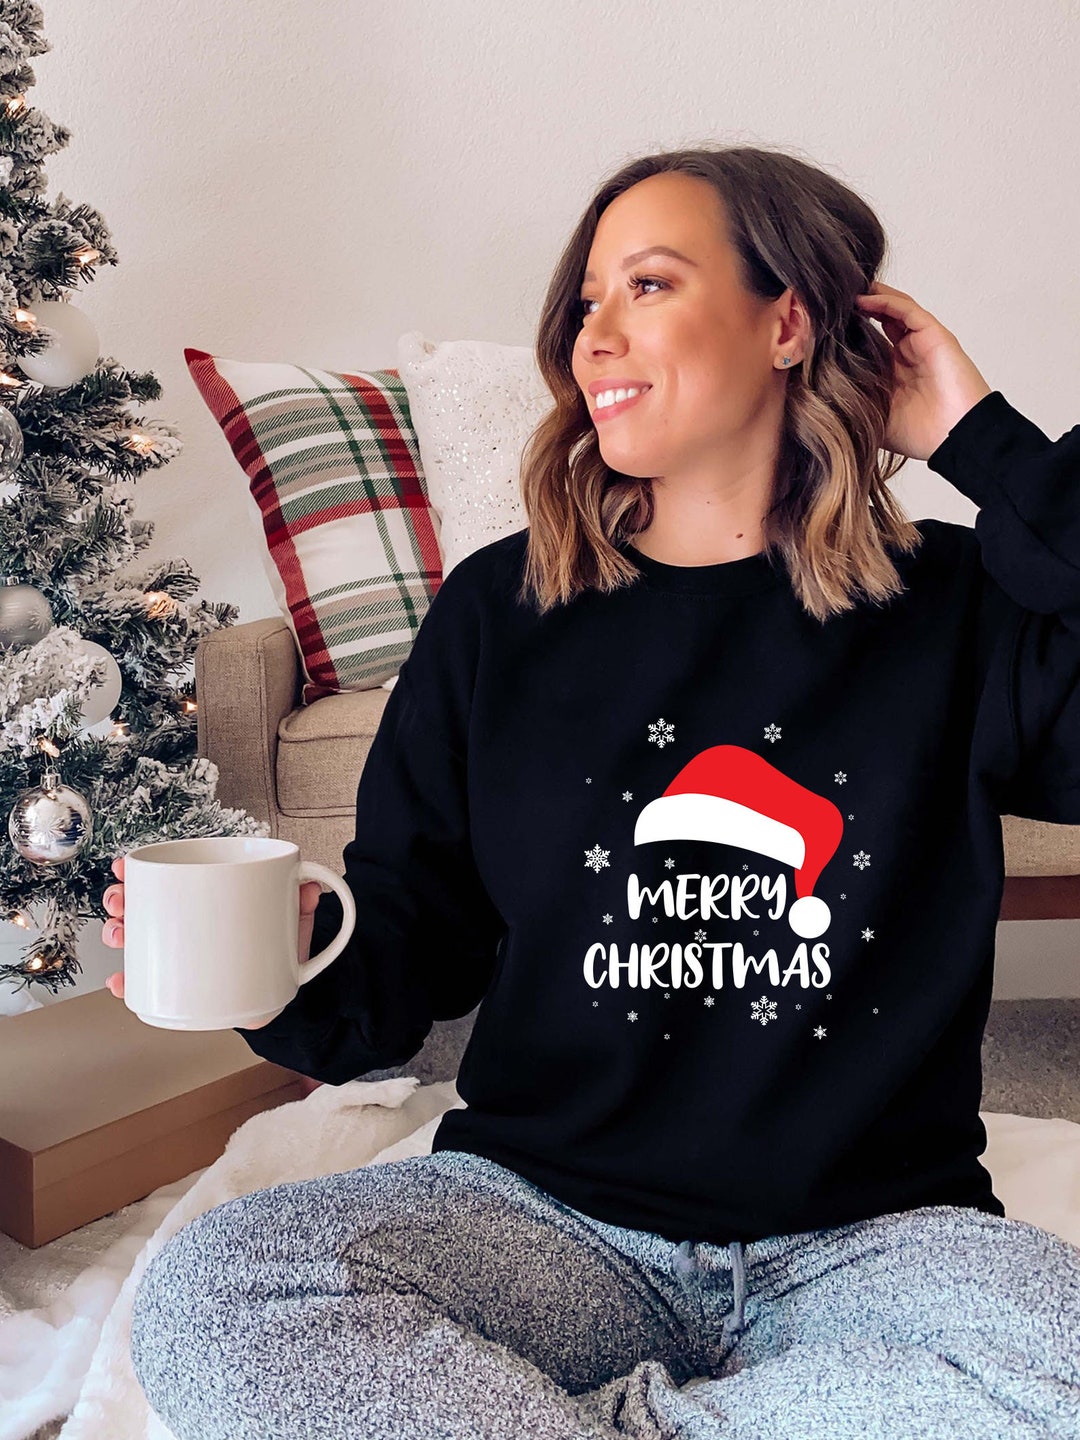  YSJZBS Womens Christmas Sweater,best black of friday deal,super cheap  stuff under 1 dollar,matching hoodies for best of friends,under 20 dollars,women's  day & work skirts : Clothing, Shoes & Jewelry